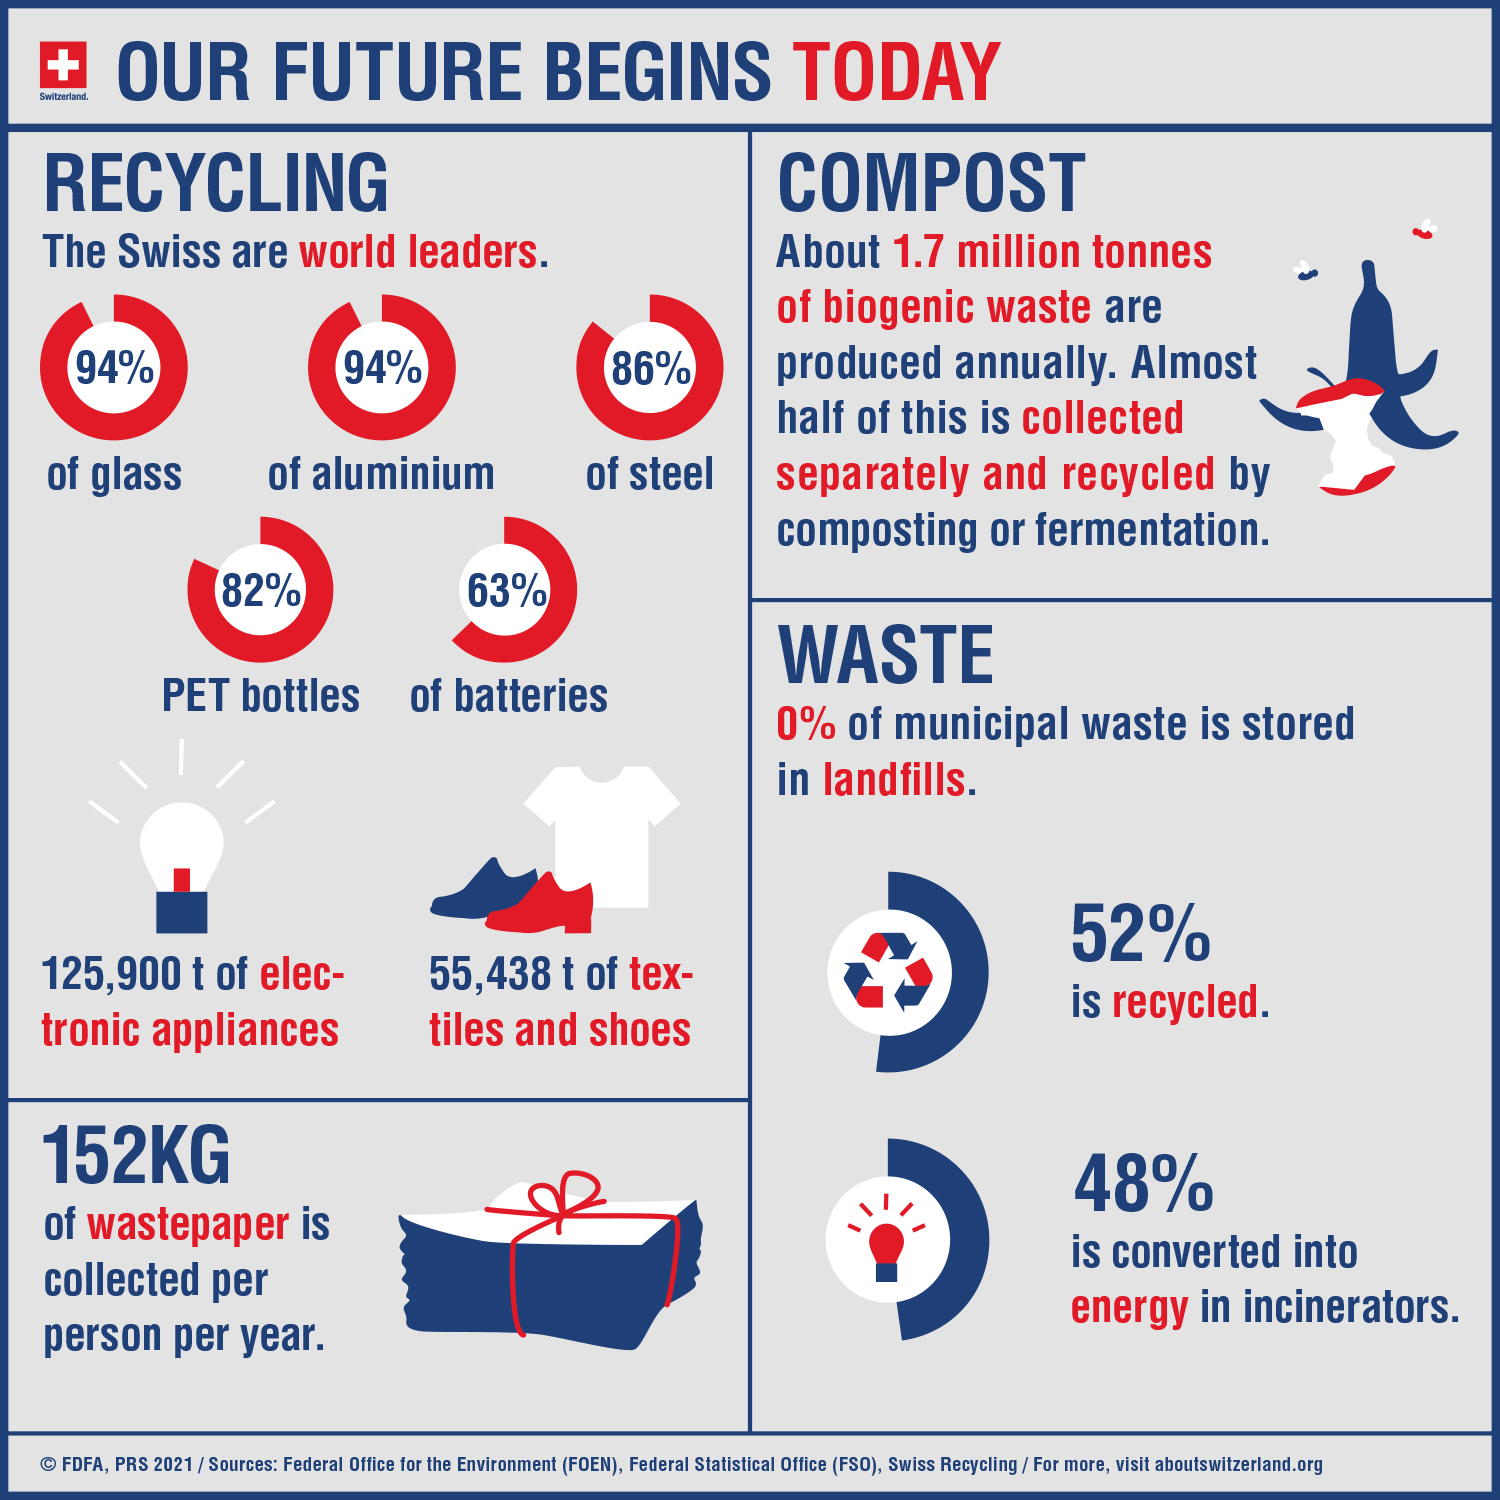 As the infographic shows, 52% of waste is recycled. The remaining 48% is sent to incineration plants where it is converted into energy.